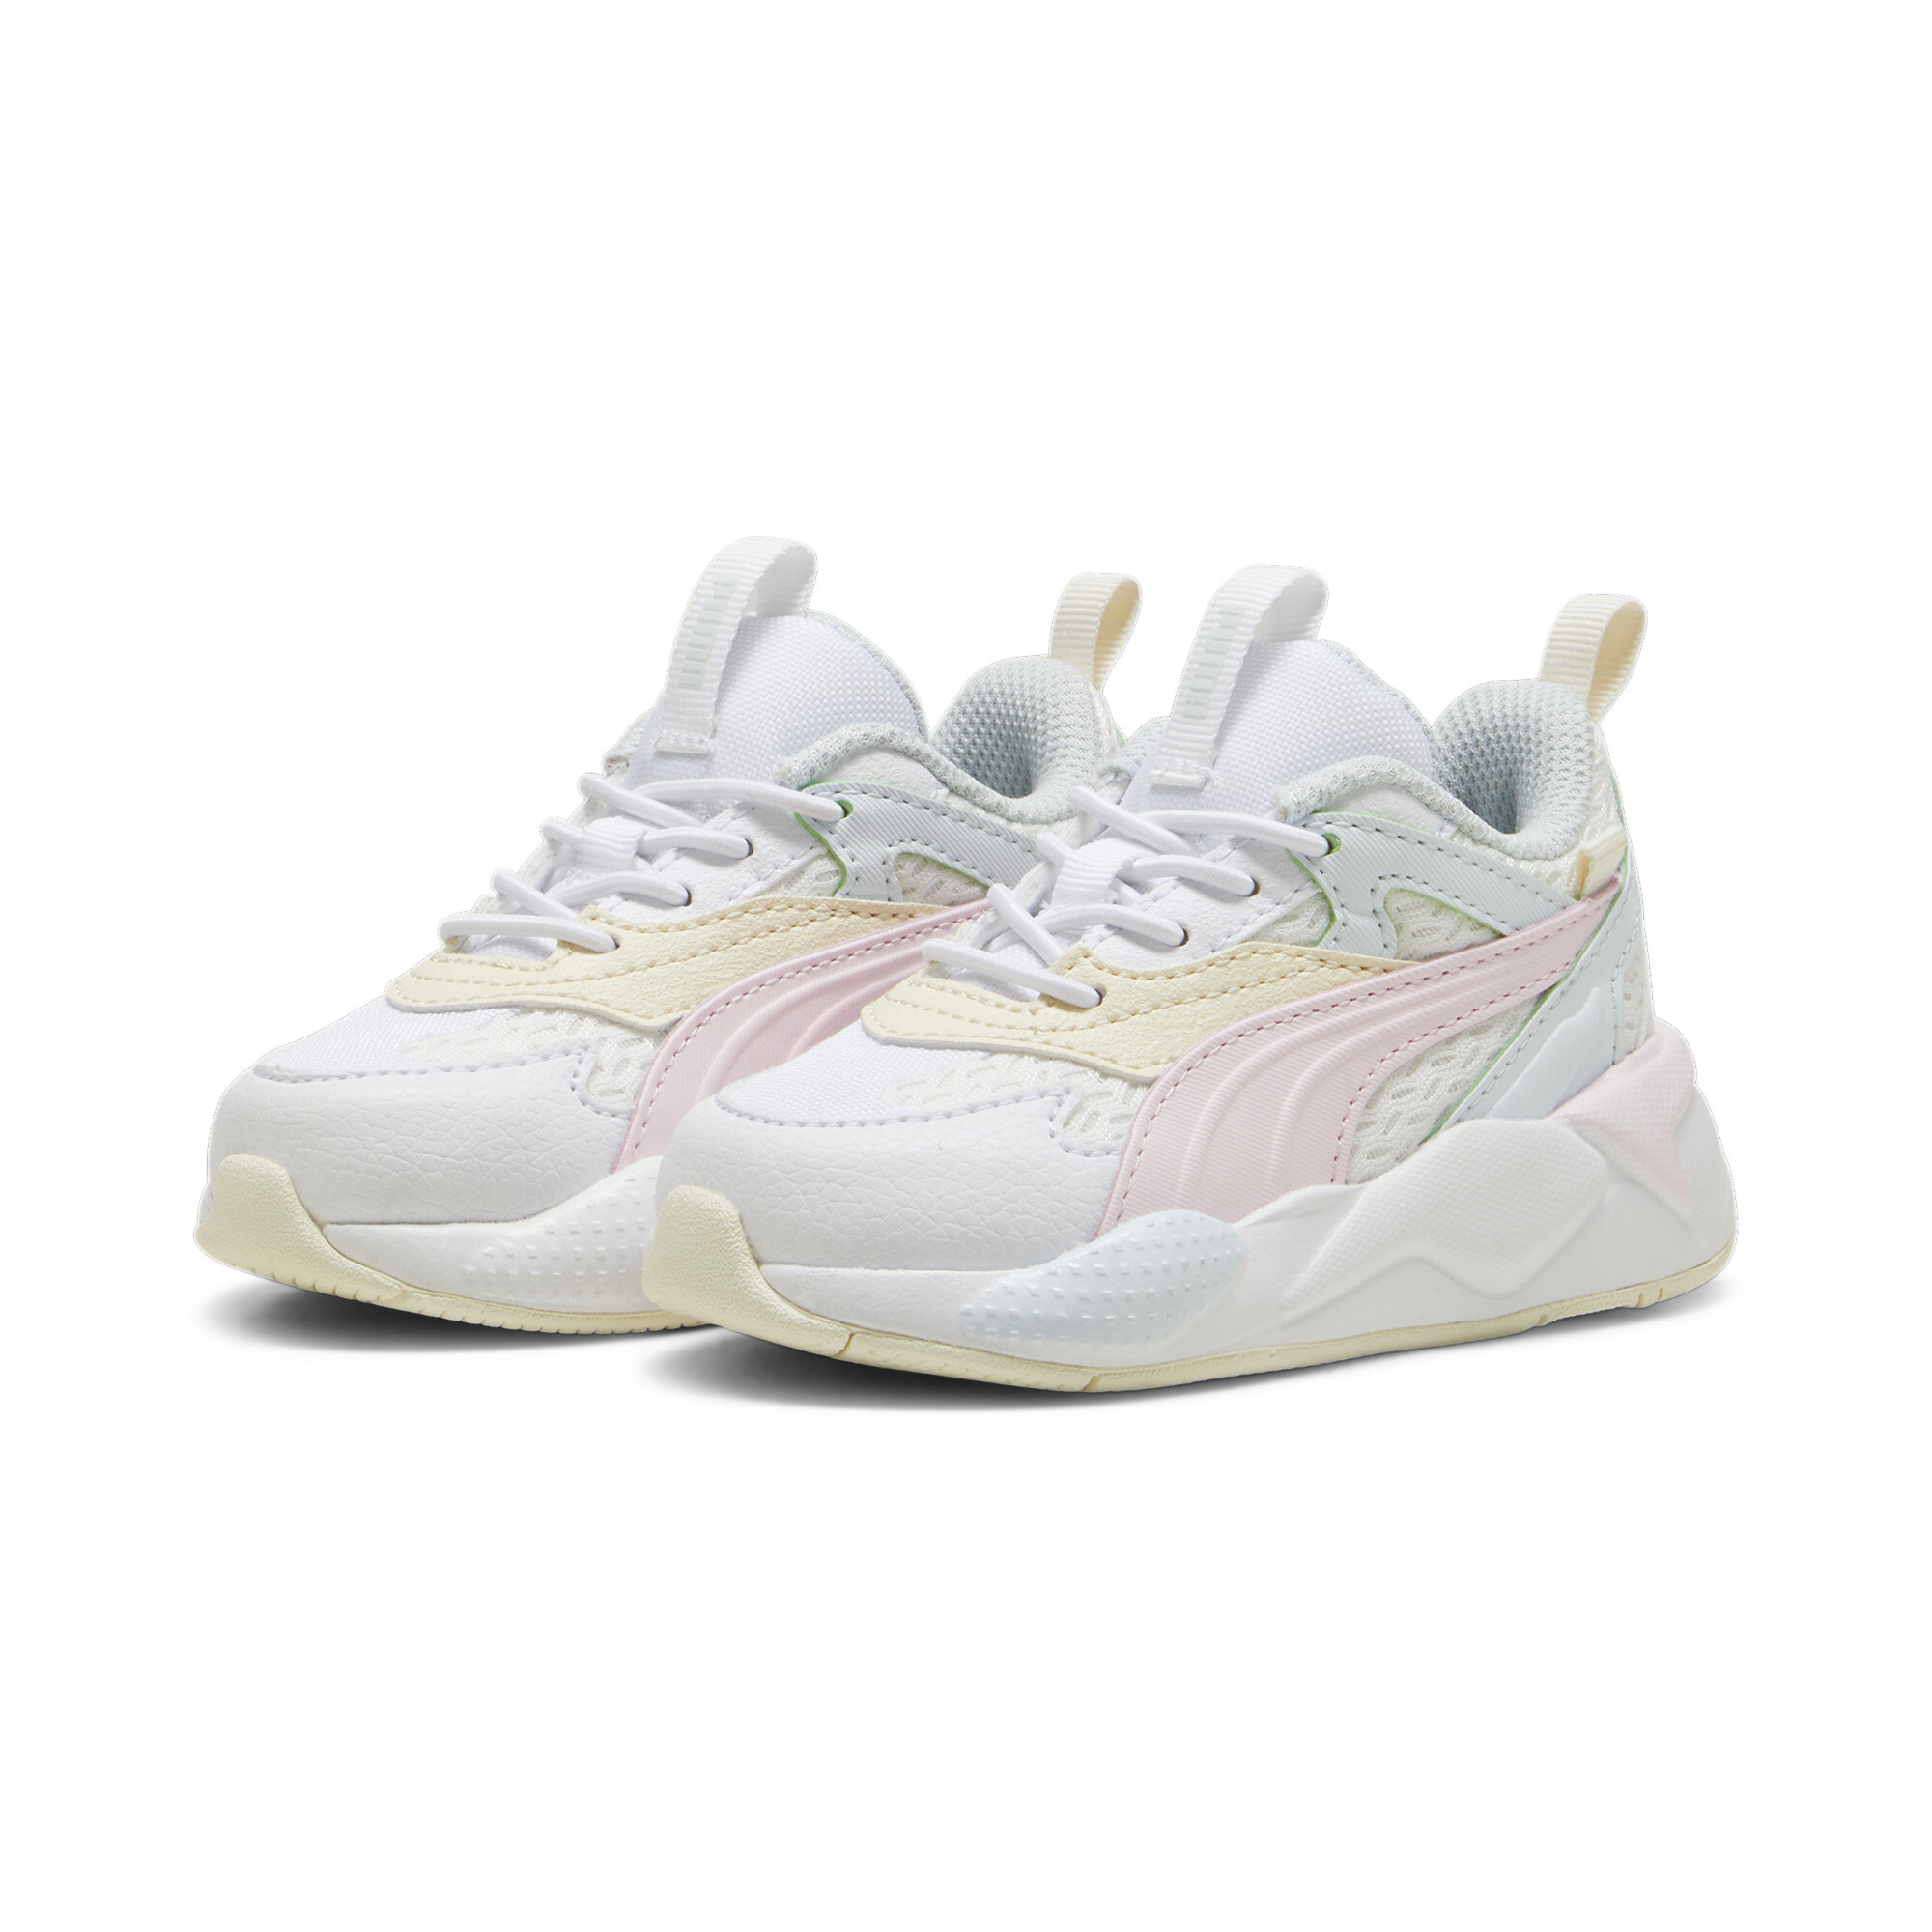 Puma RS-X Efekt Toddlers' Sneakers, White, Size 27, Shoes